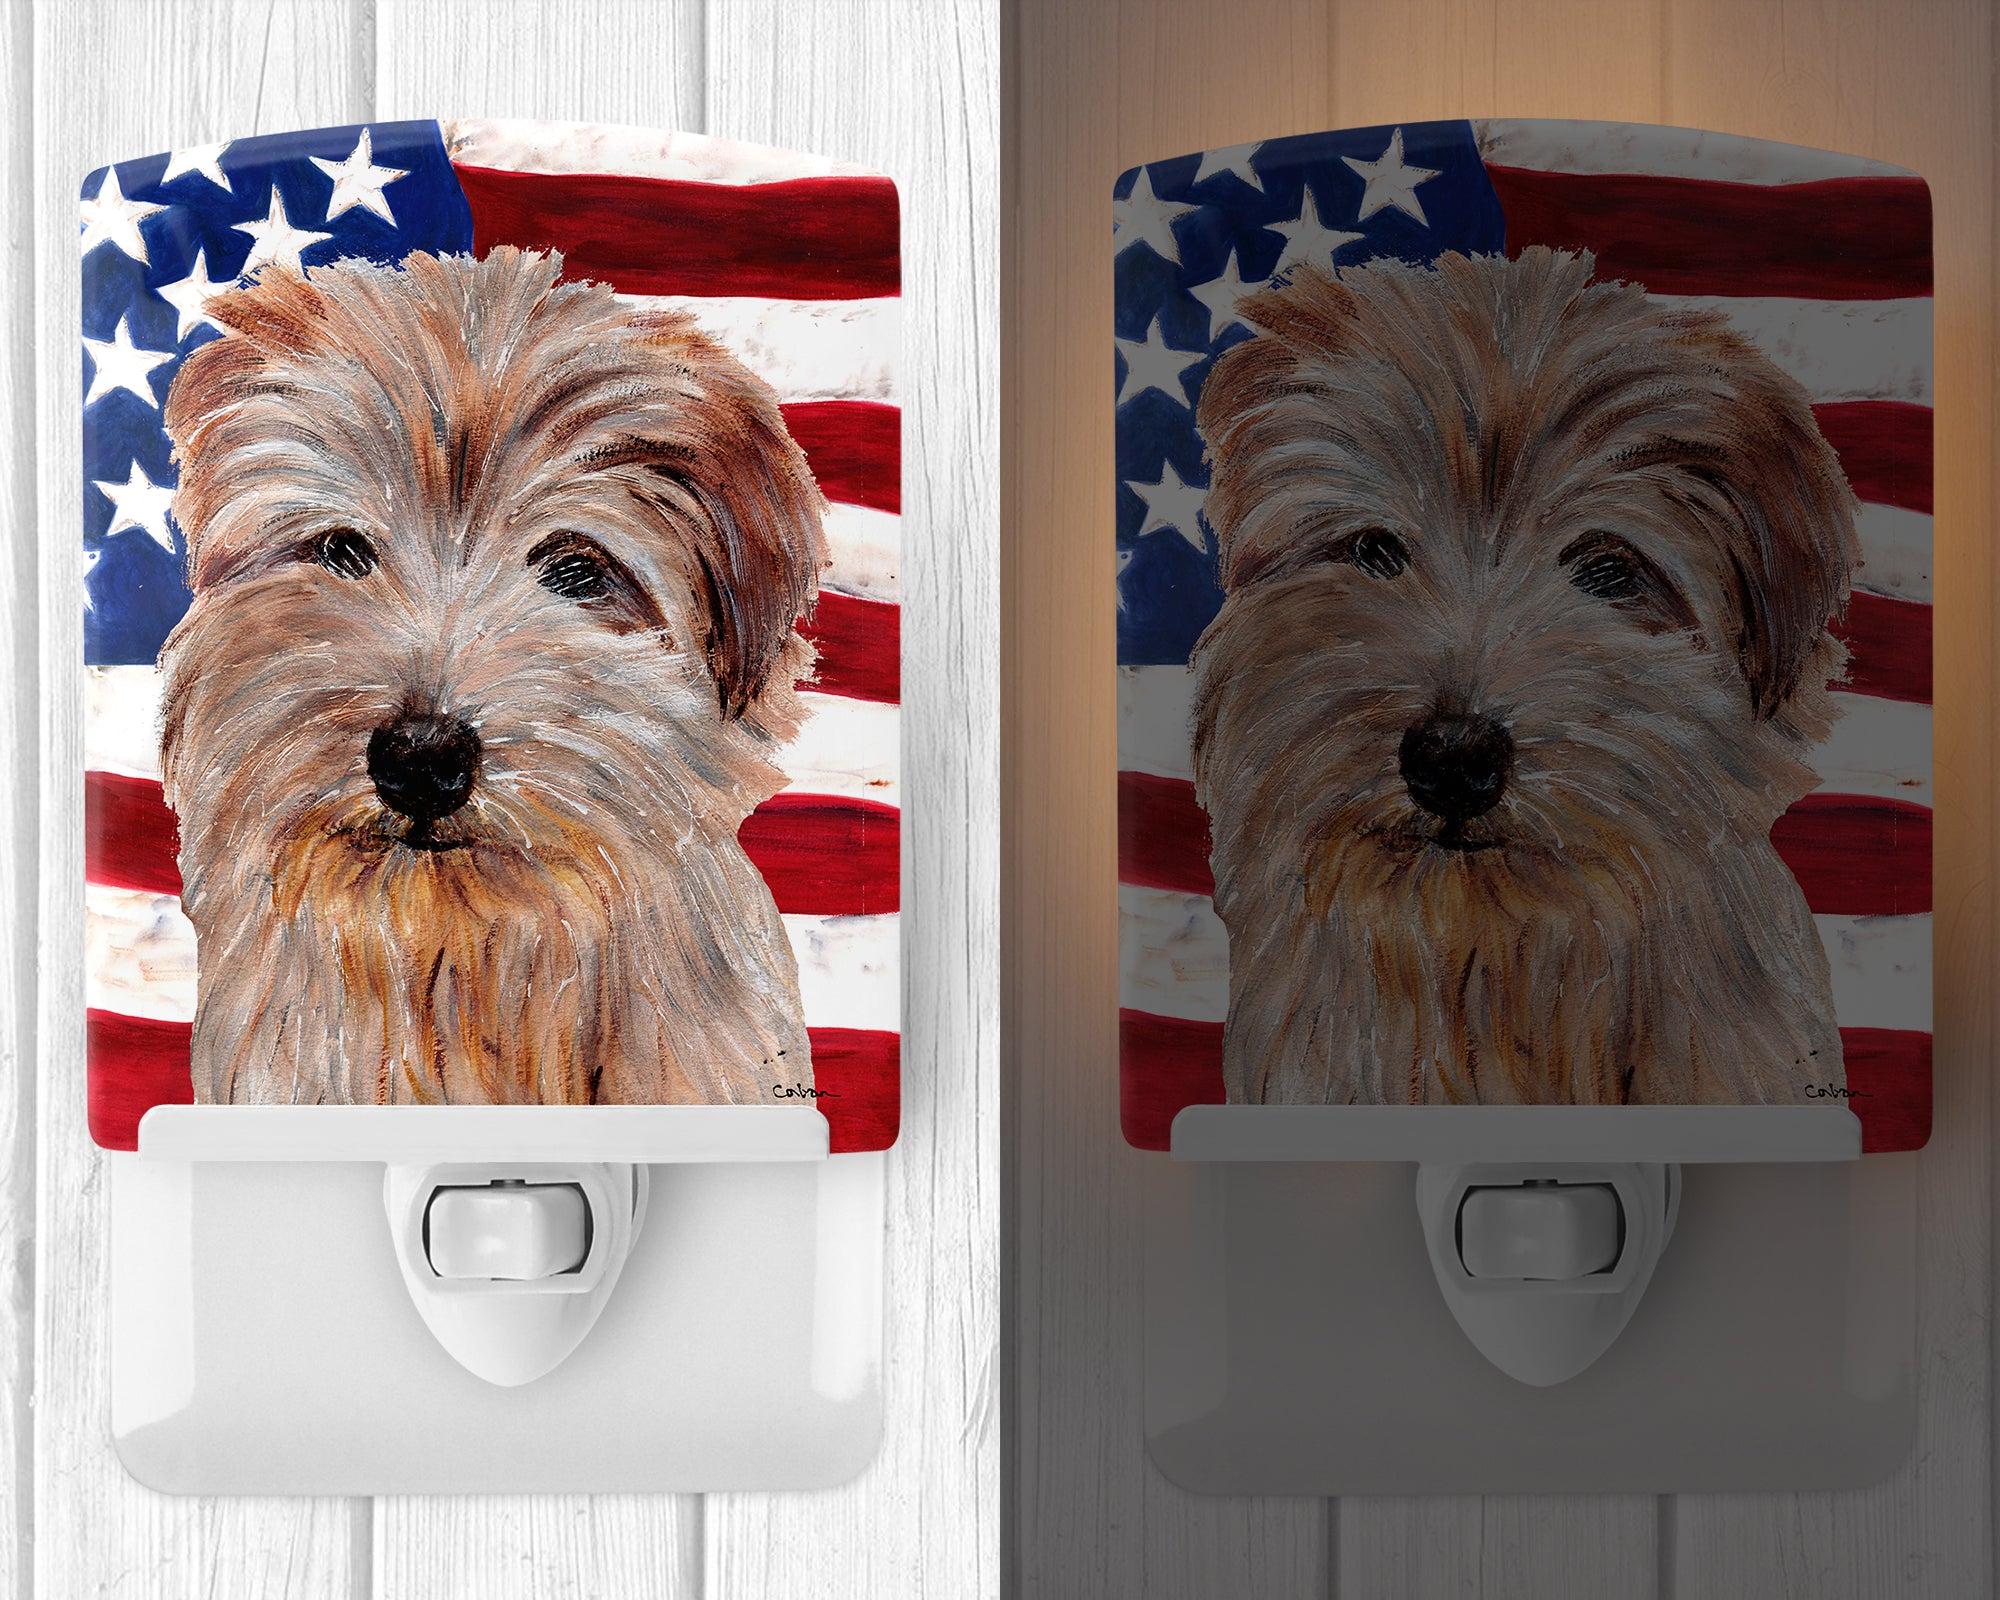 Norfolk Terrier with American Flag USA Ceramic Night Light SC9640CNL - the-store.com